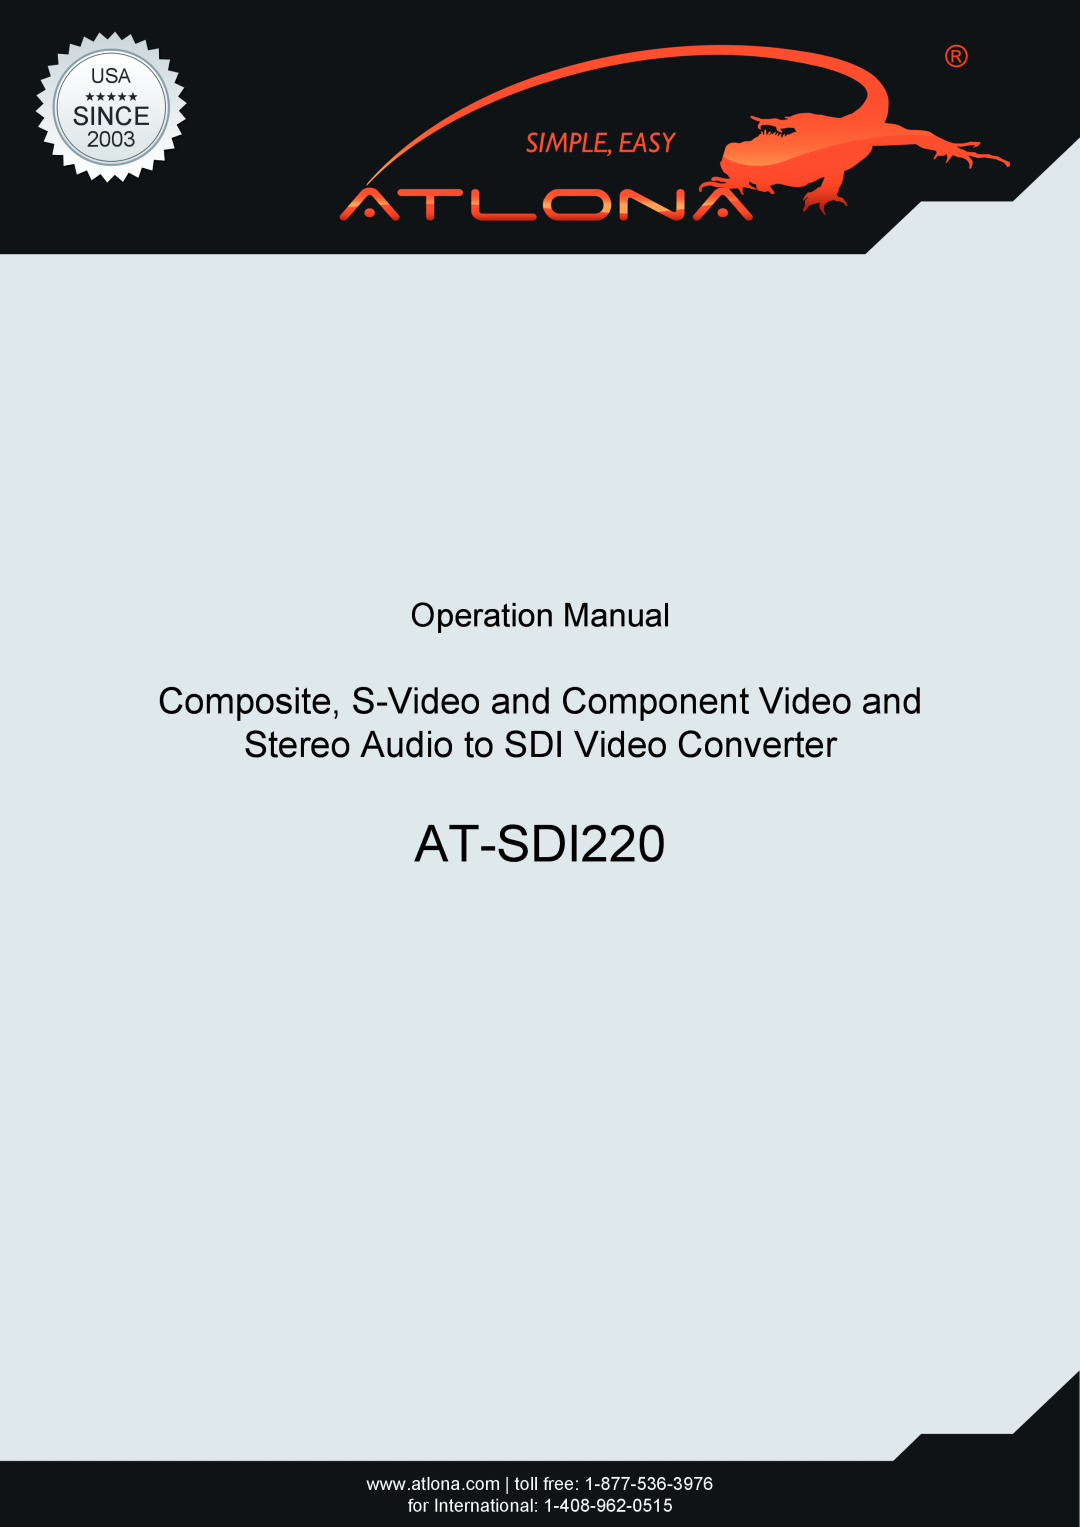 Atlona AT-SDI220 operation manual 2003, for International, Composite, S-Video and Component Video and, Operation Manual 